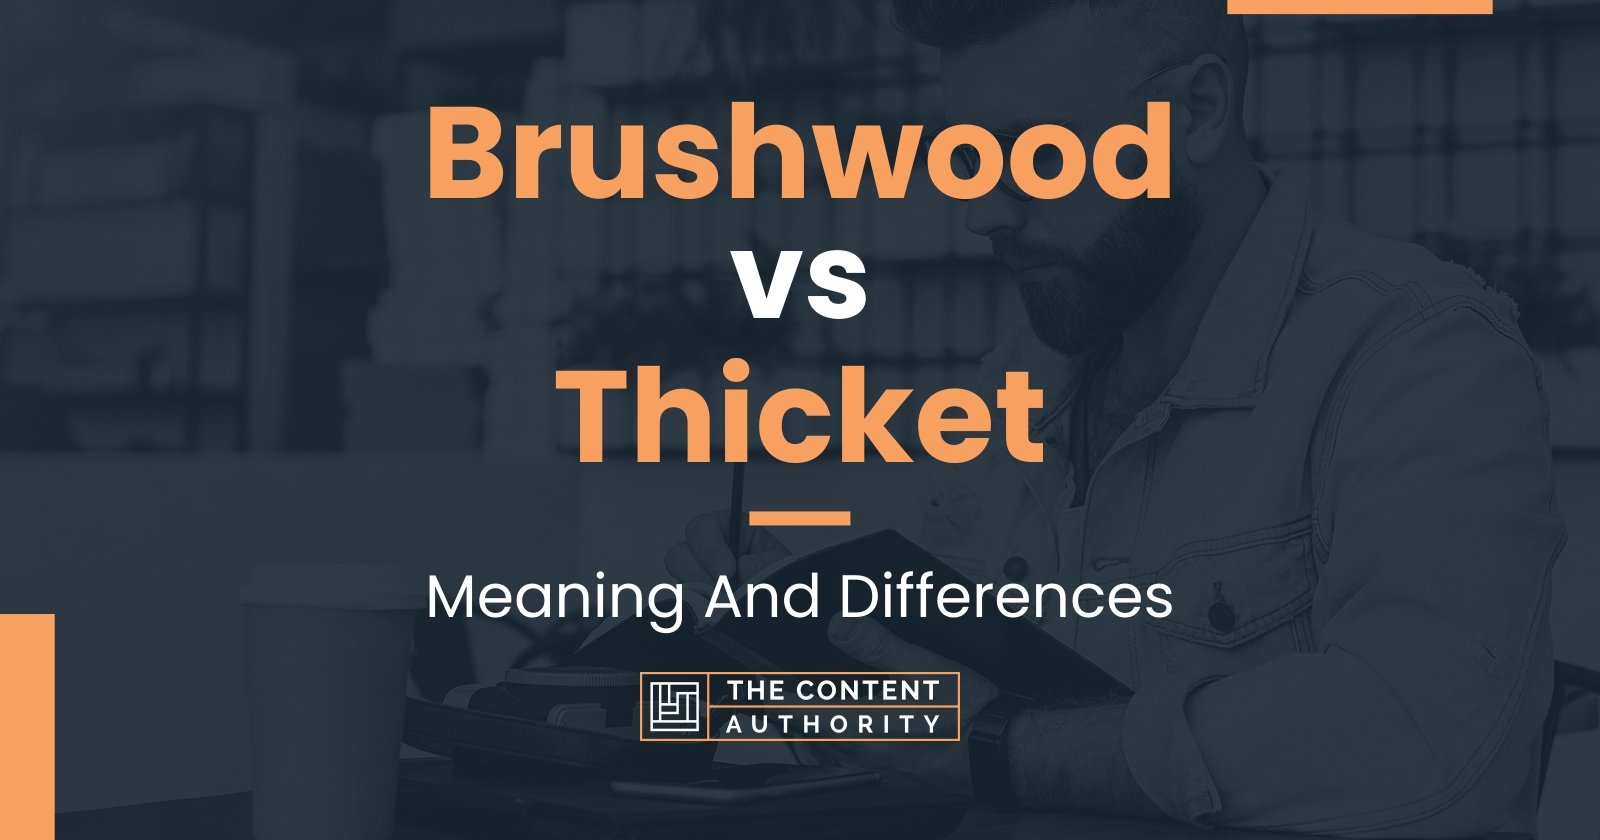 Brushwood vs Thicket: Meaning And Differences